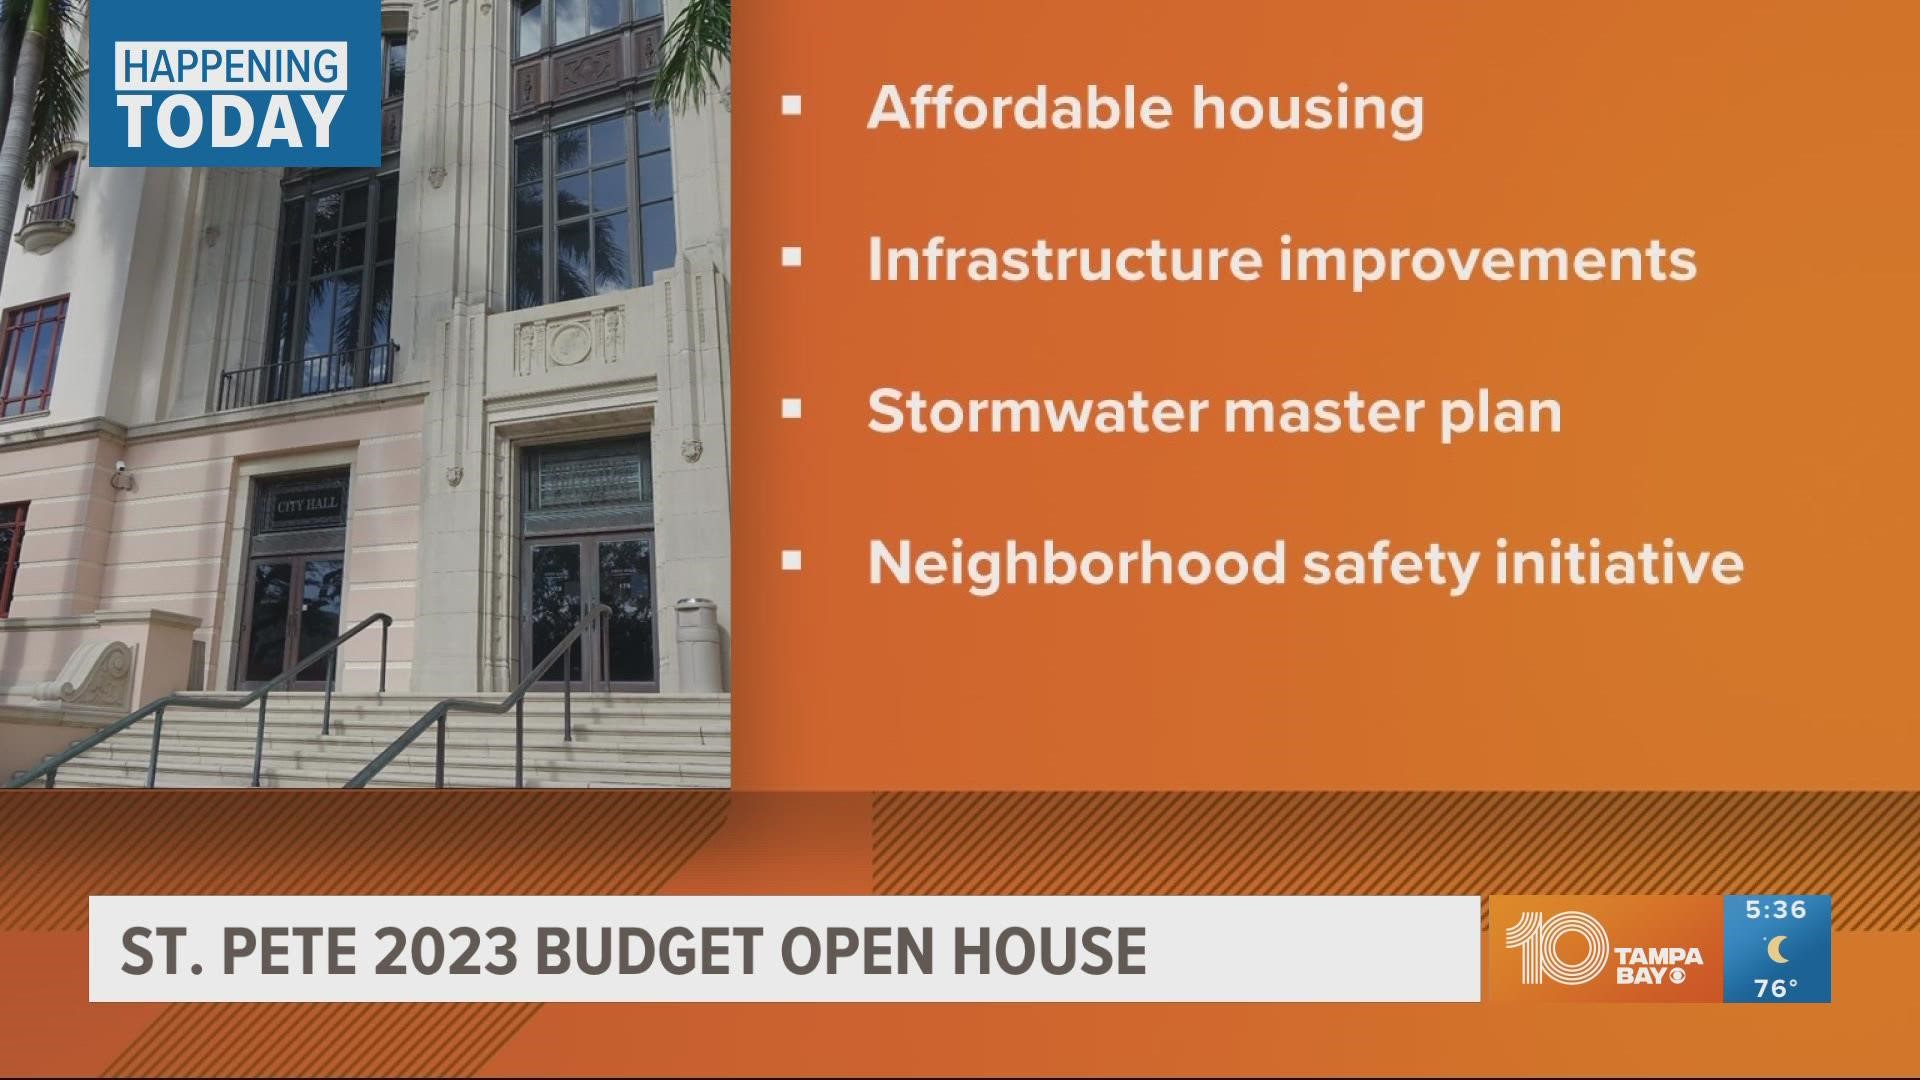 Early plans prioritize affordable housing, infrastructure and community safety